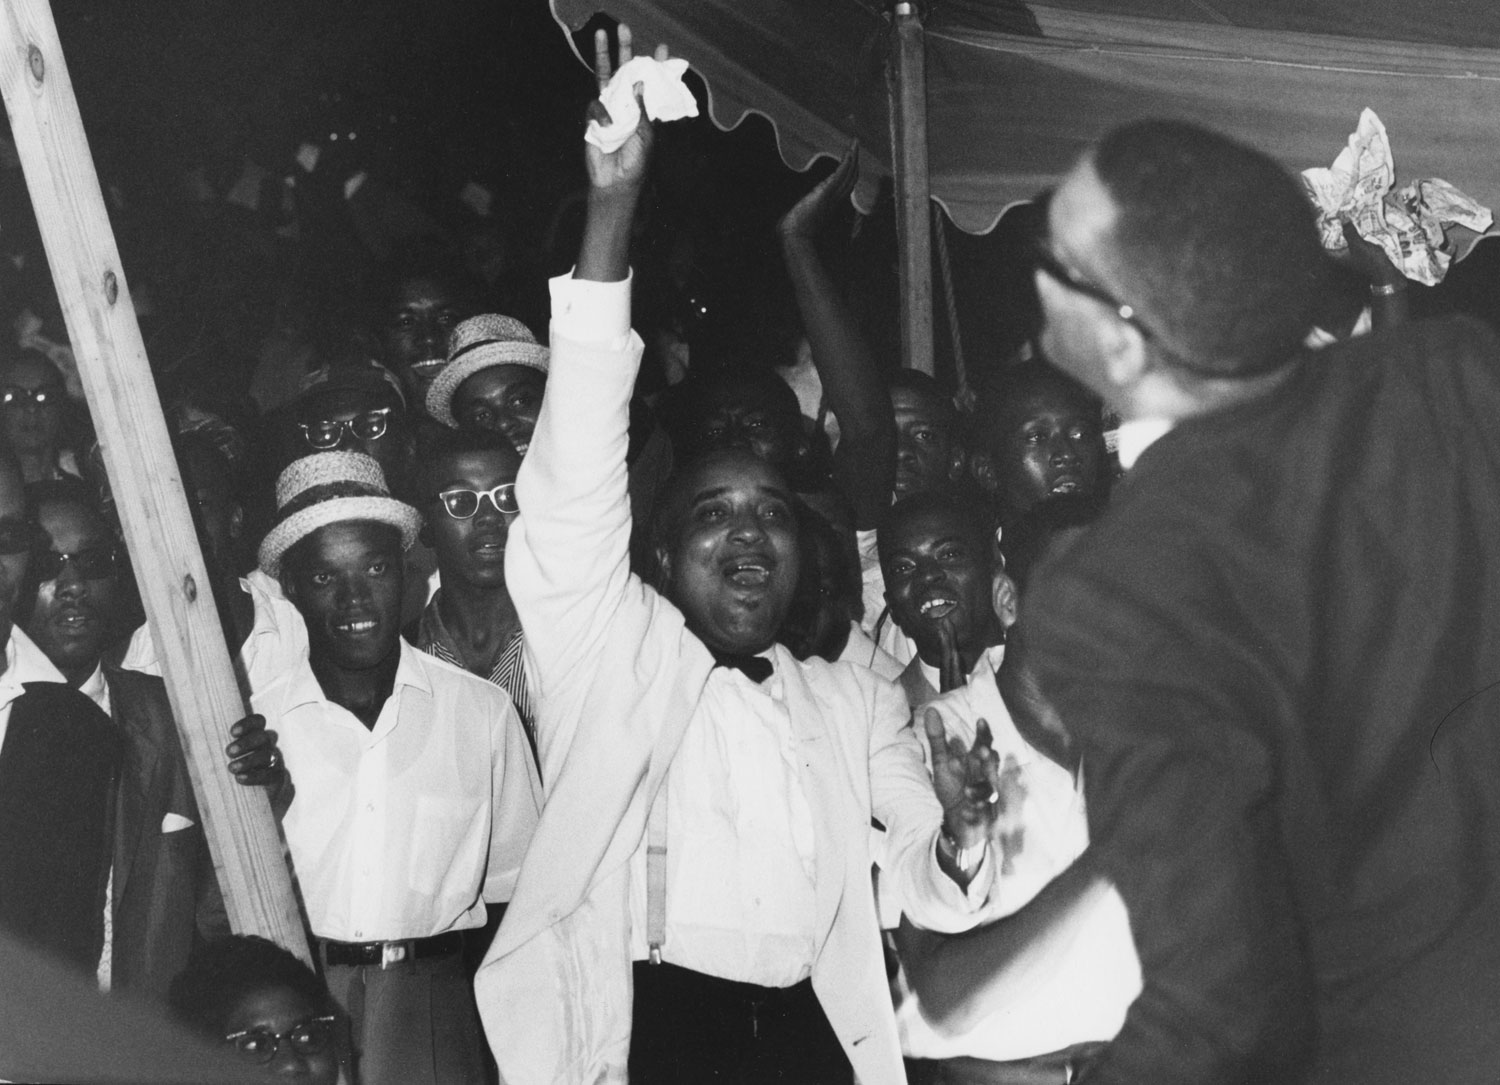 The Salute to Freedom benefit concert in Birmingham, Ala., August 5, 1963.